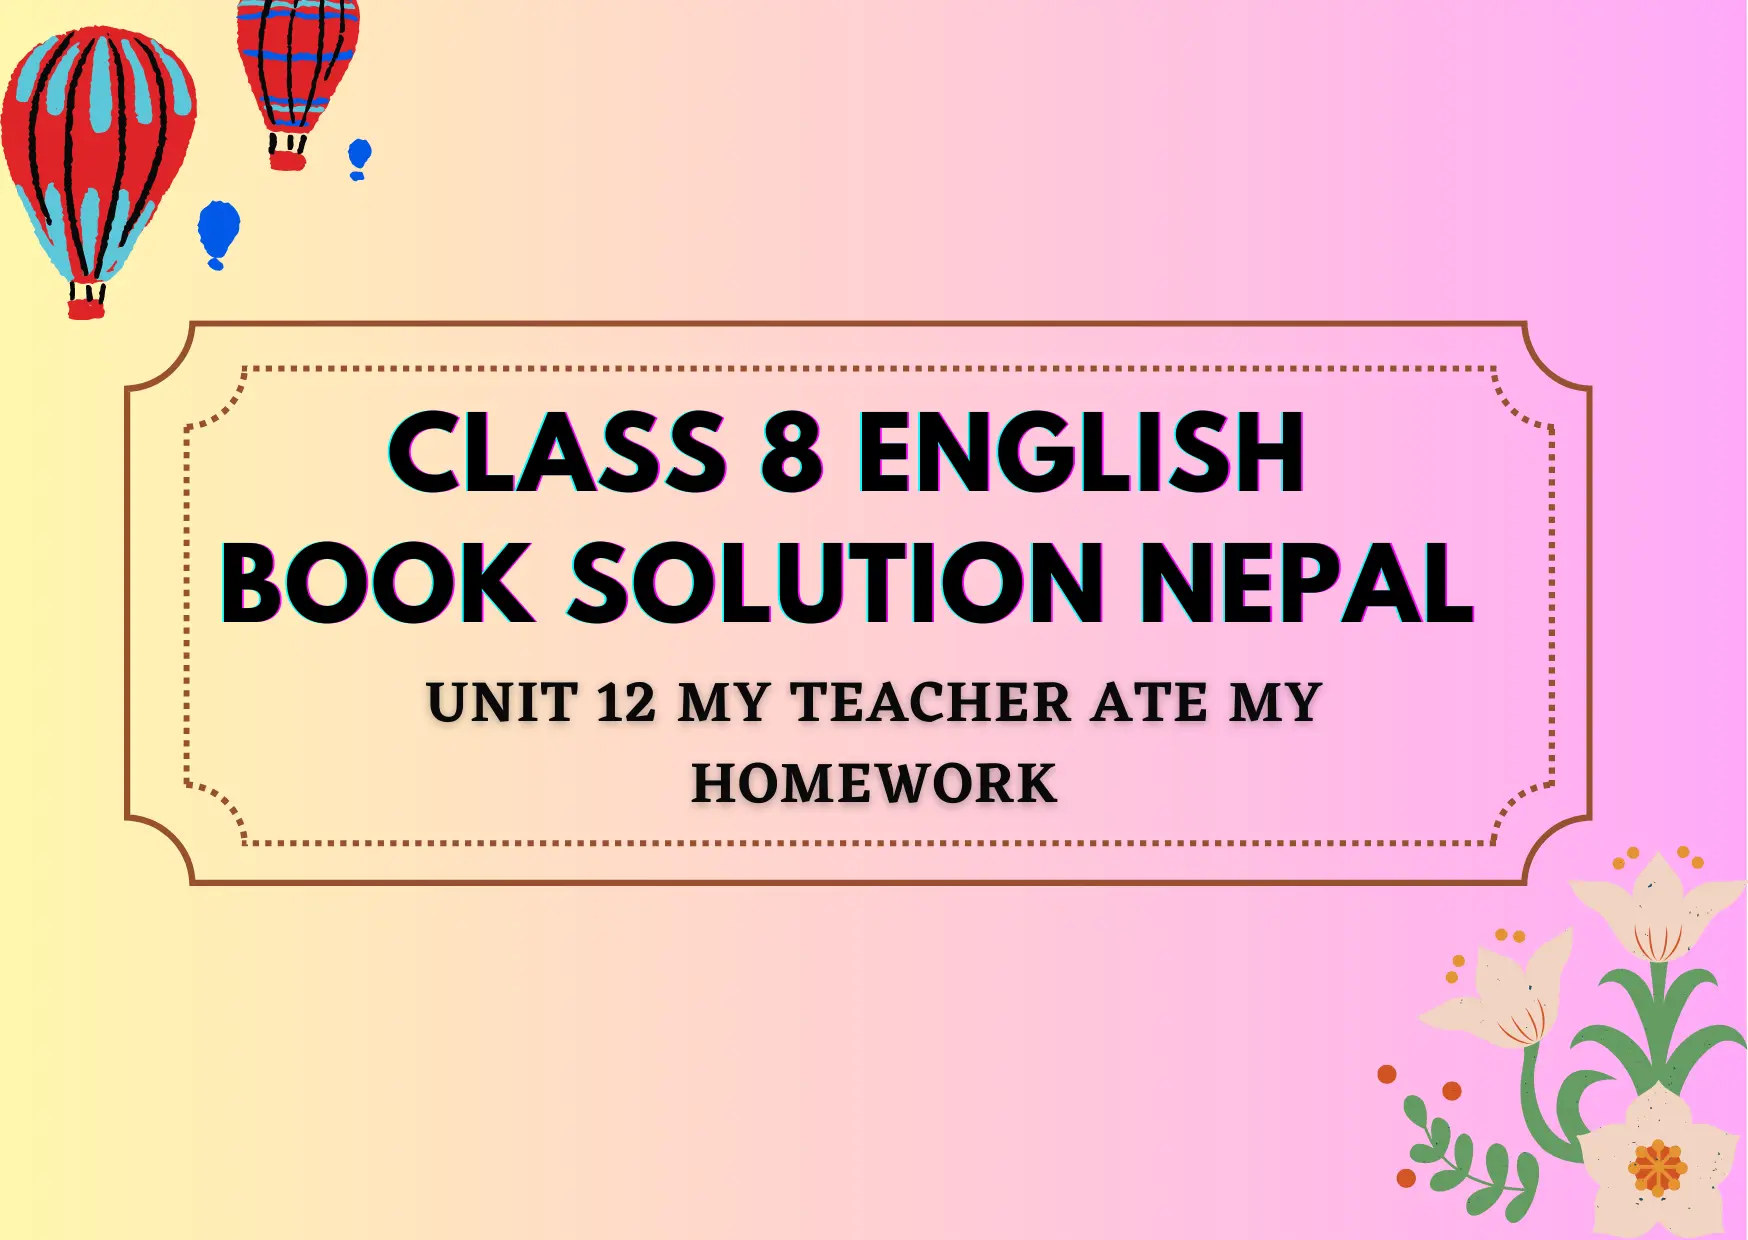 Class 8 English Book solution Nepal Unit 12 Exercise